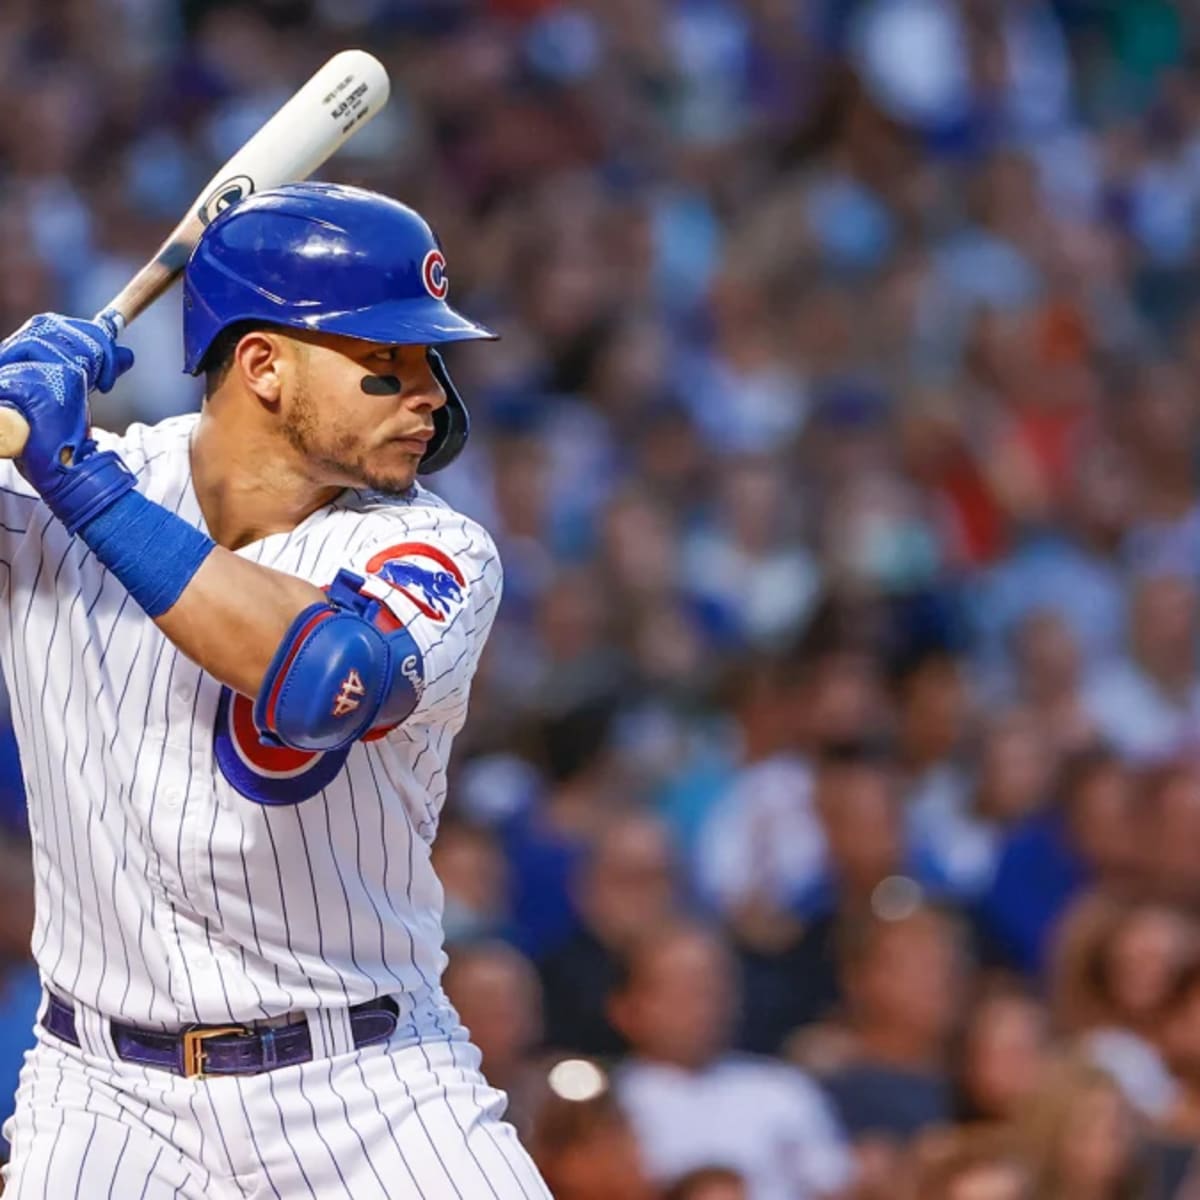 Willson Contreras injury update: Cubs catcher (hamstring) expected